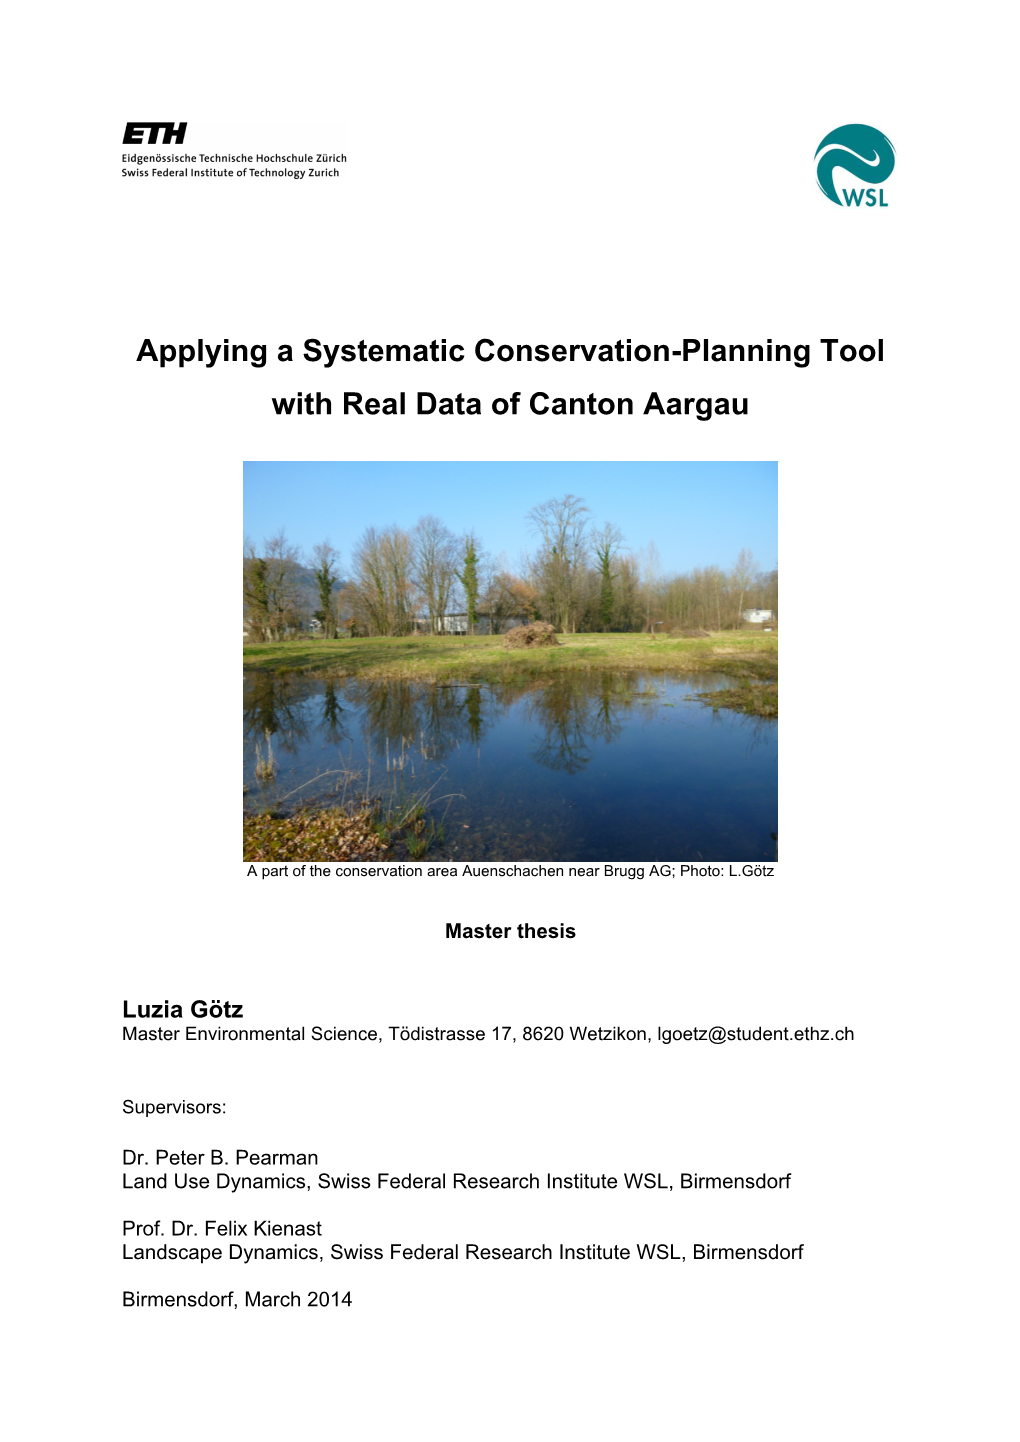 Applying a Systematic Conservation-Planning Tool with Real Data of Canton Aargau